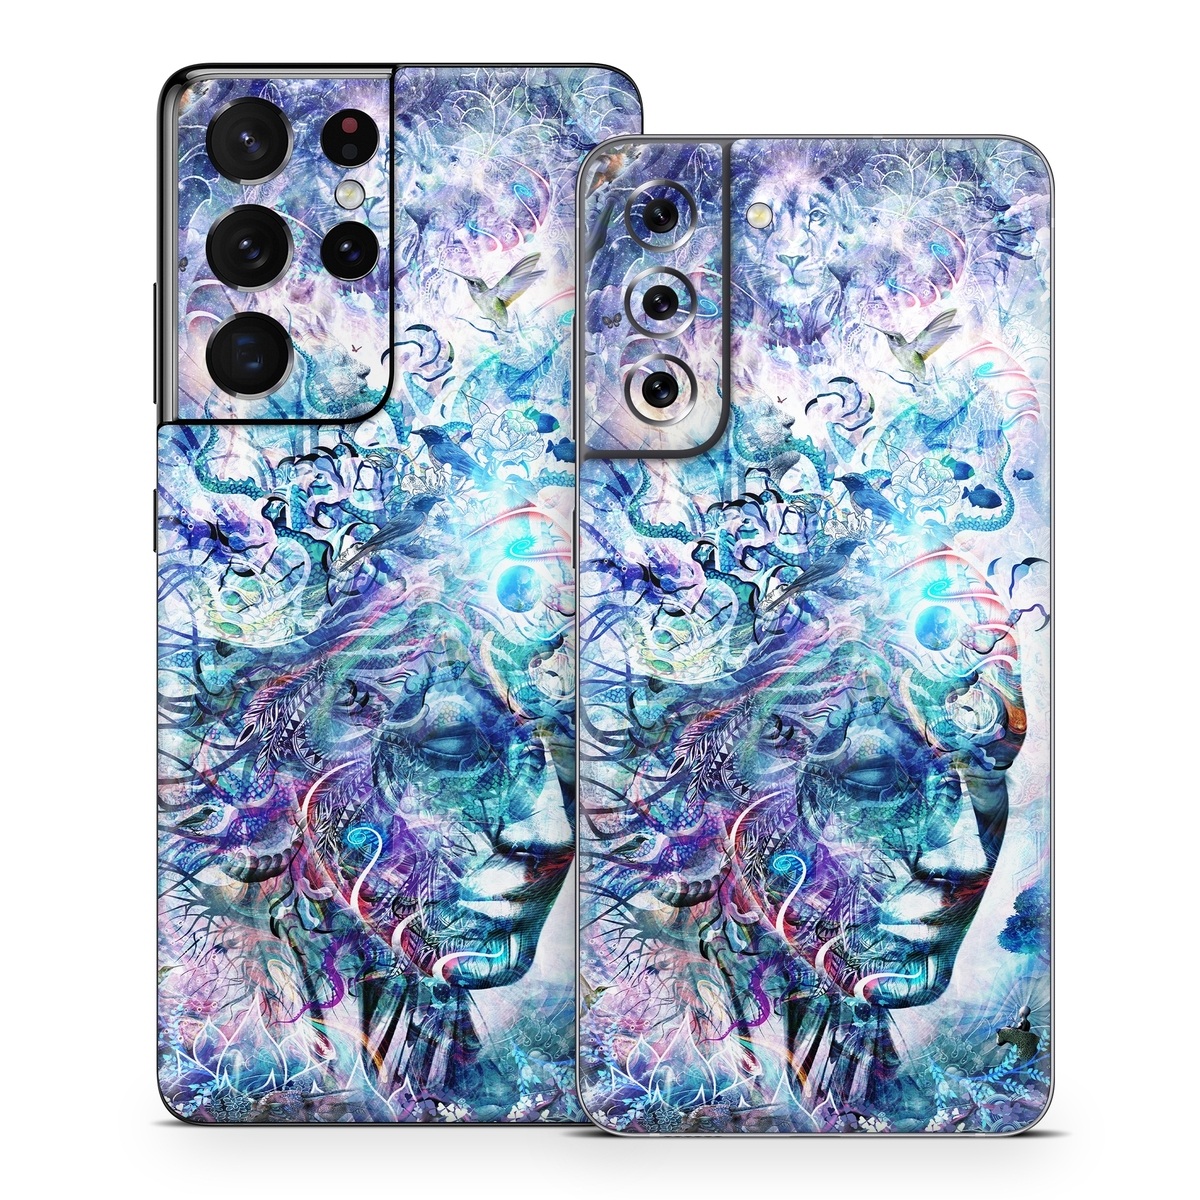 Samsung Galaxy S21 Series Skin design of Psychedelic art, Water, Fractal art, Art, Pattern, Graphic design, Design, Illustration, Electric blue, Visual arts, with blue, purple, green, red, gray, white colors